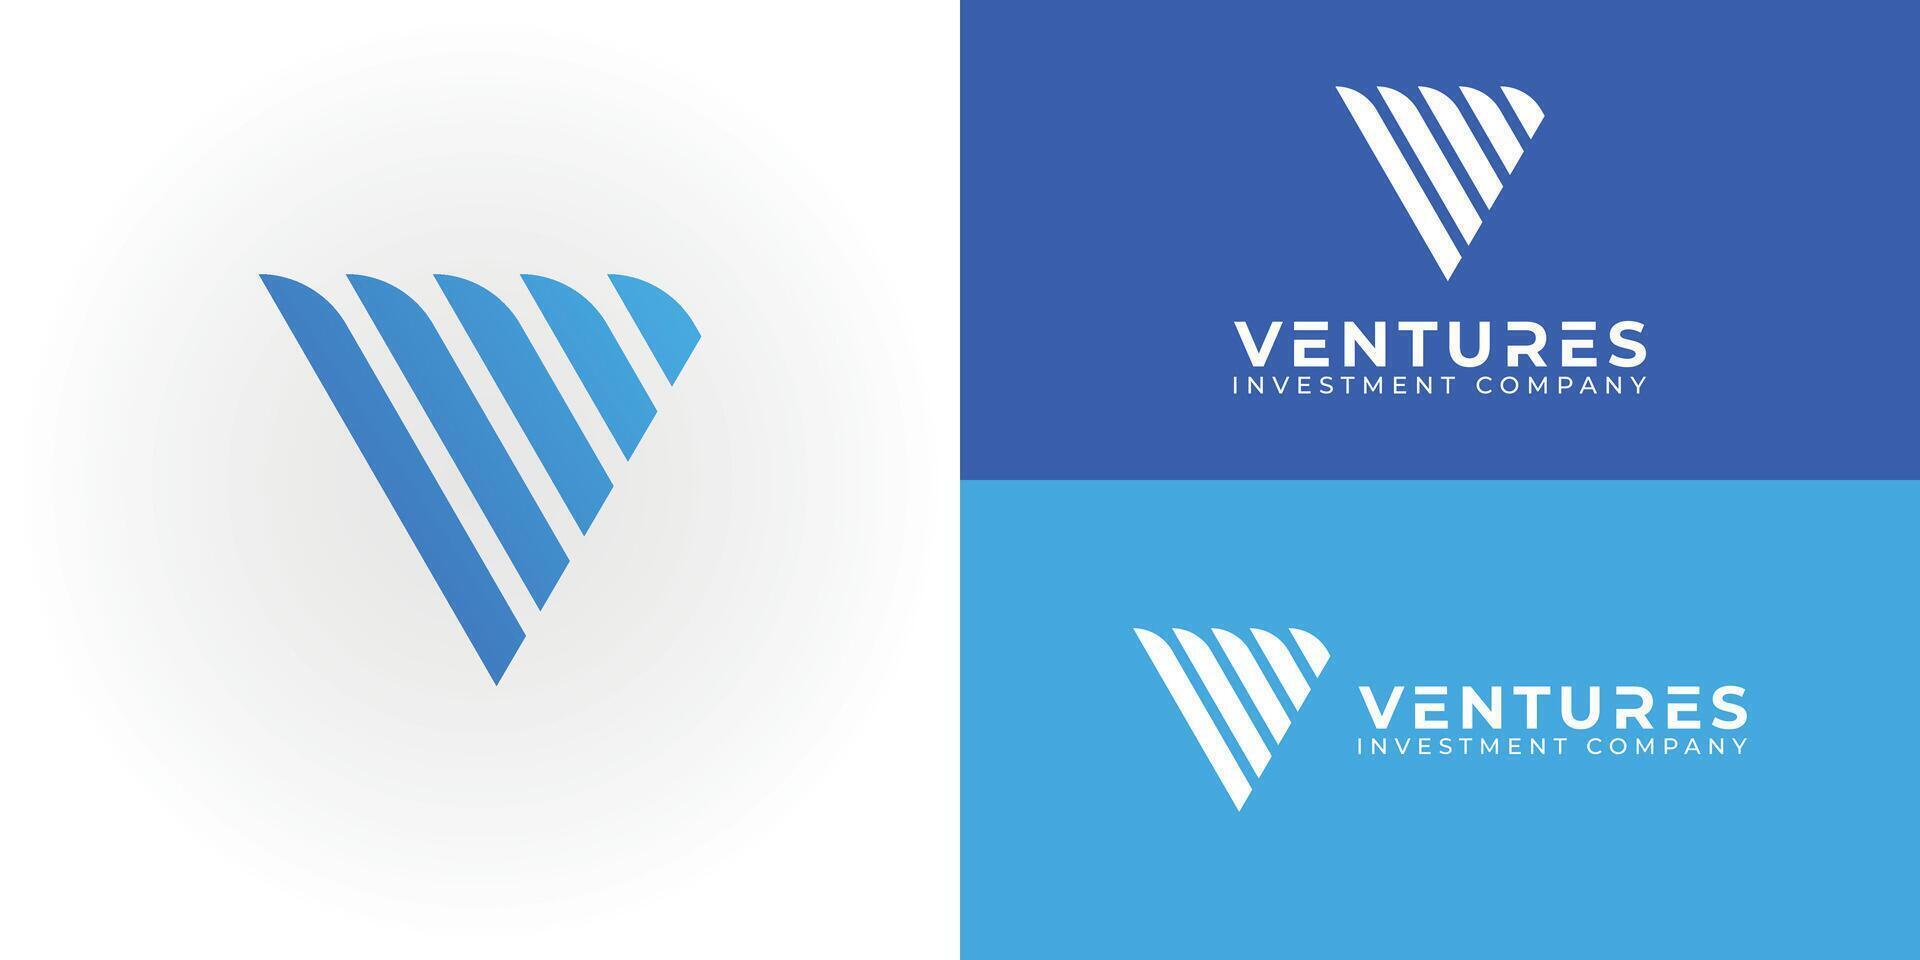 Abstract initial triangle letter V or VV logo in blue color isolated on multiple background colors. The logo is suitable for business and consulting investment company logo icon design inspiration vector